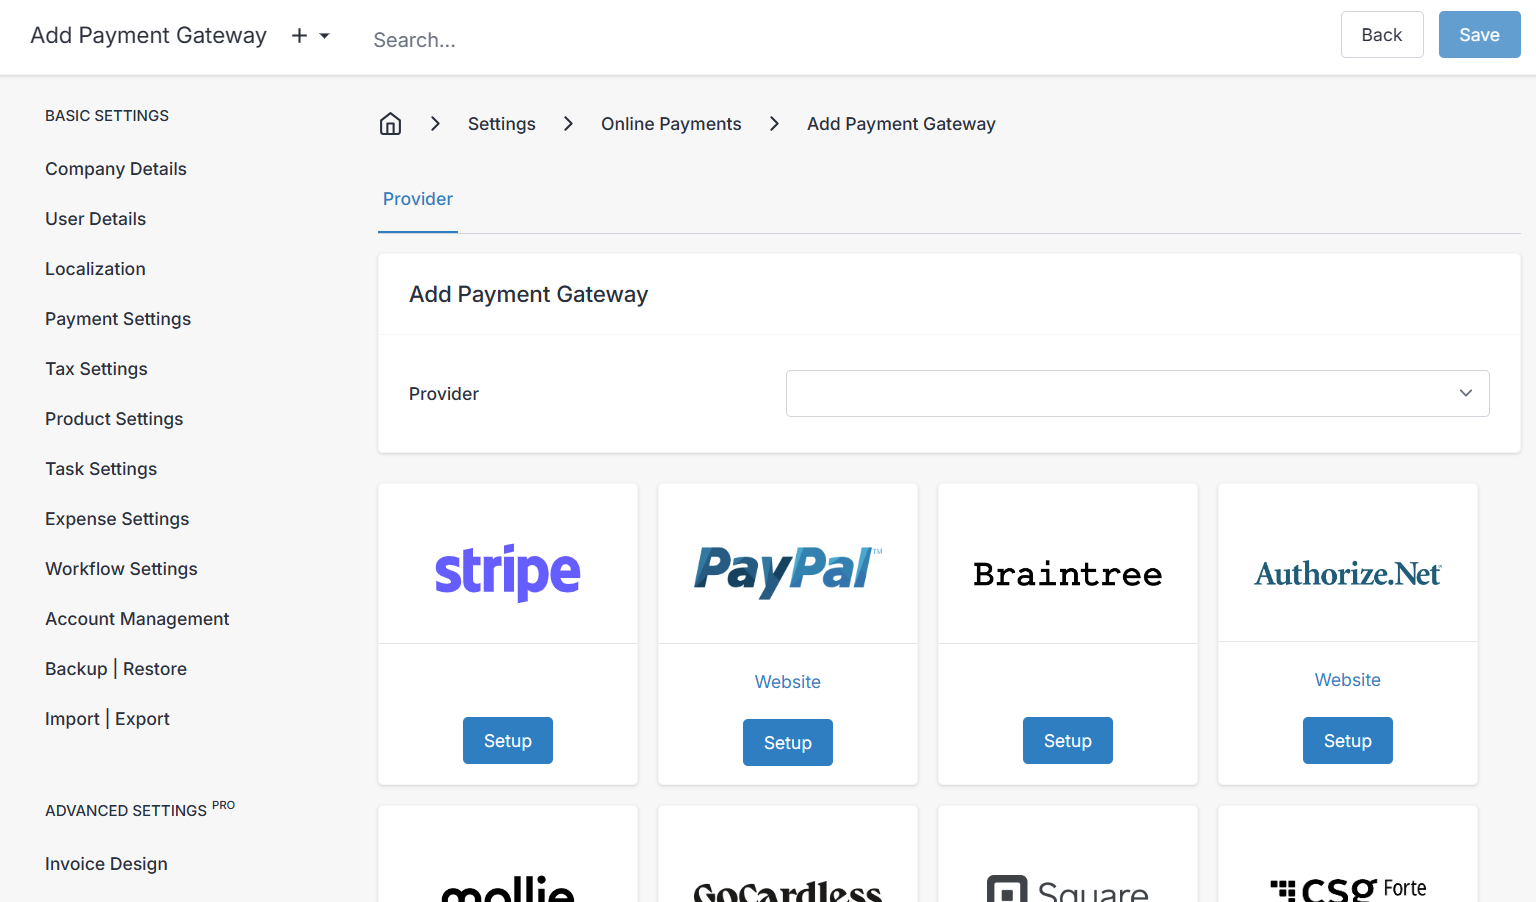 Add Payment Gateway Home Page